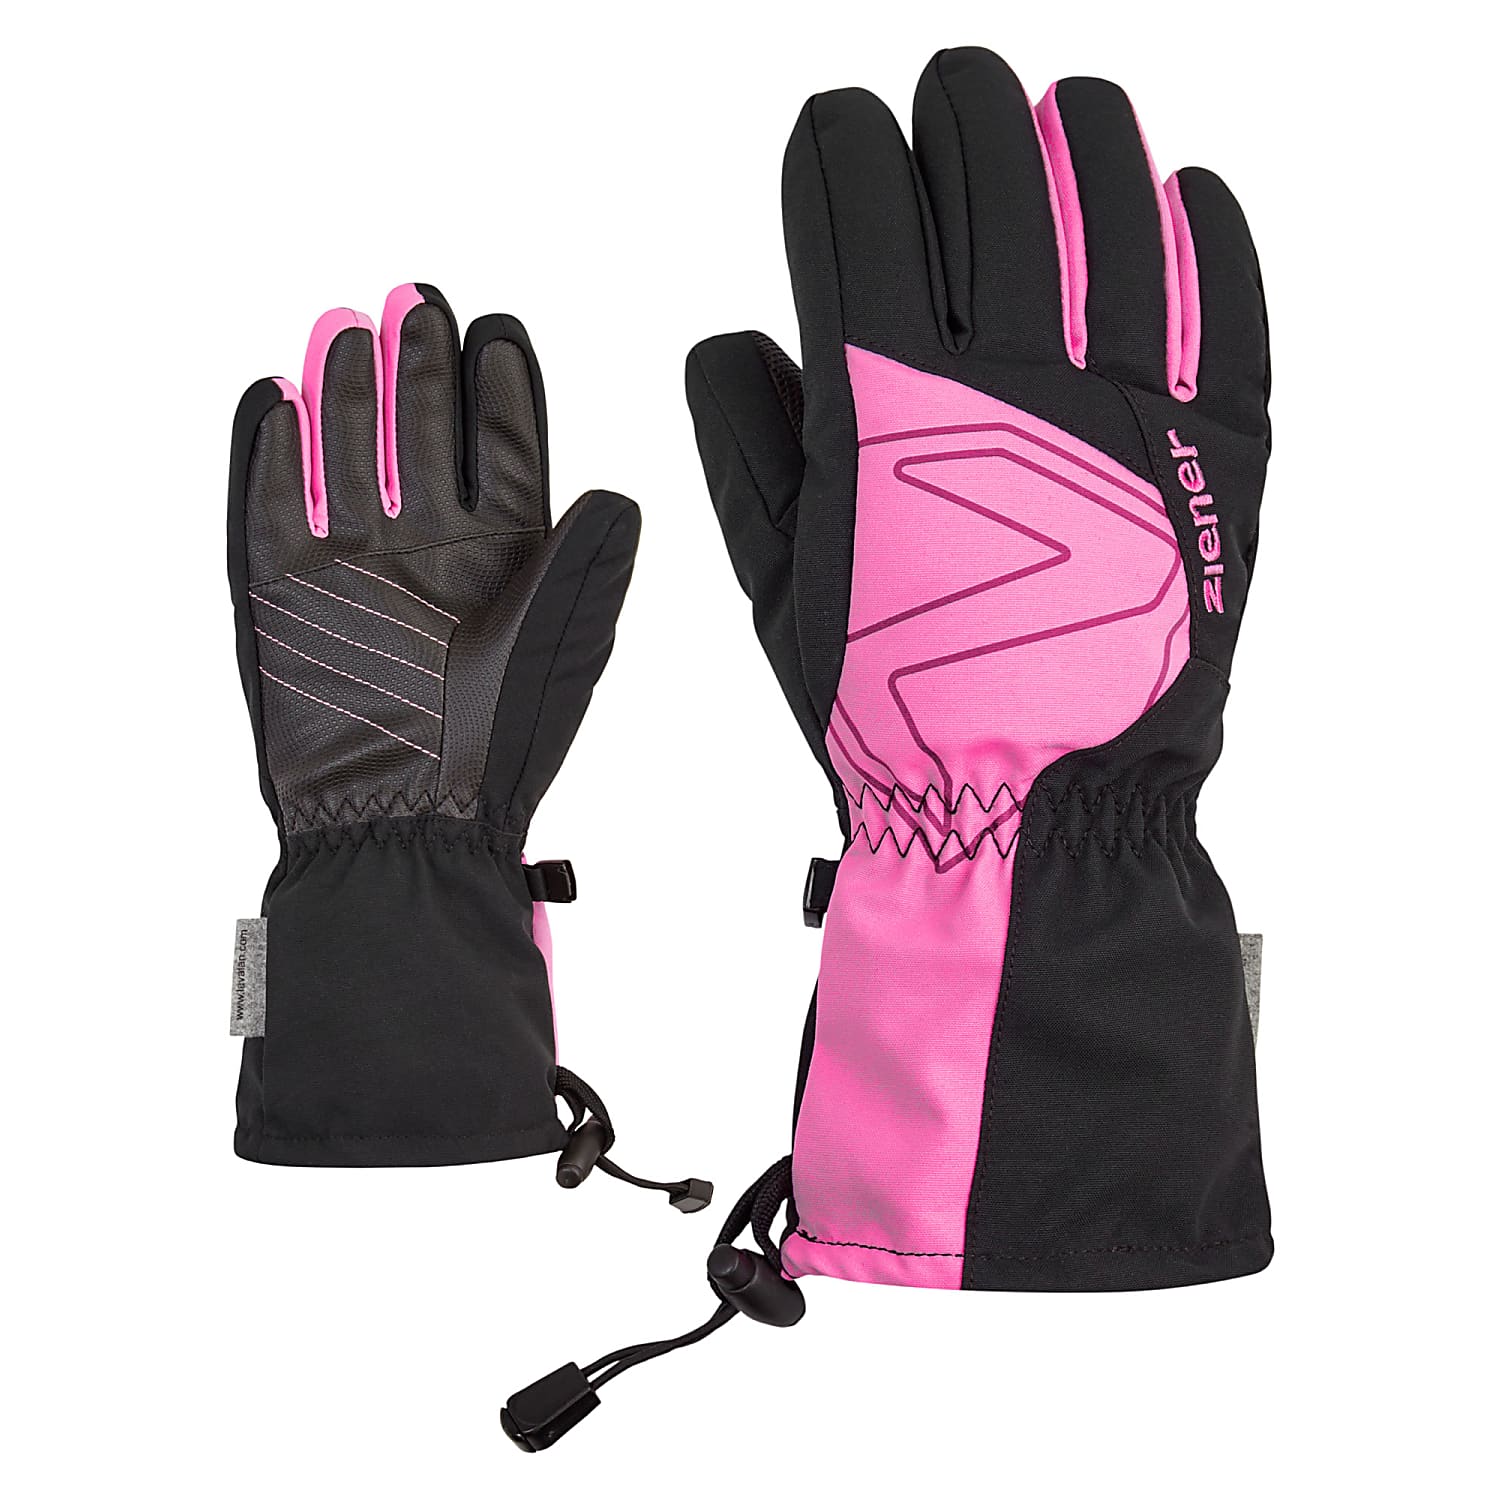 Ziener JUNIOR Pink cheap - Black GLOVE, AS Fast LAVAL shipping Fuchsia and - AW